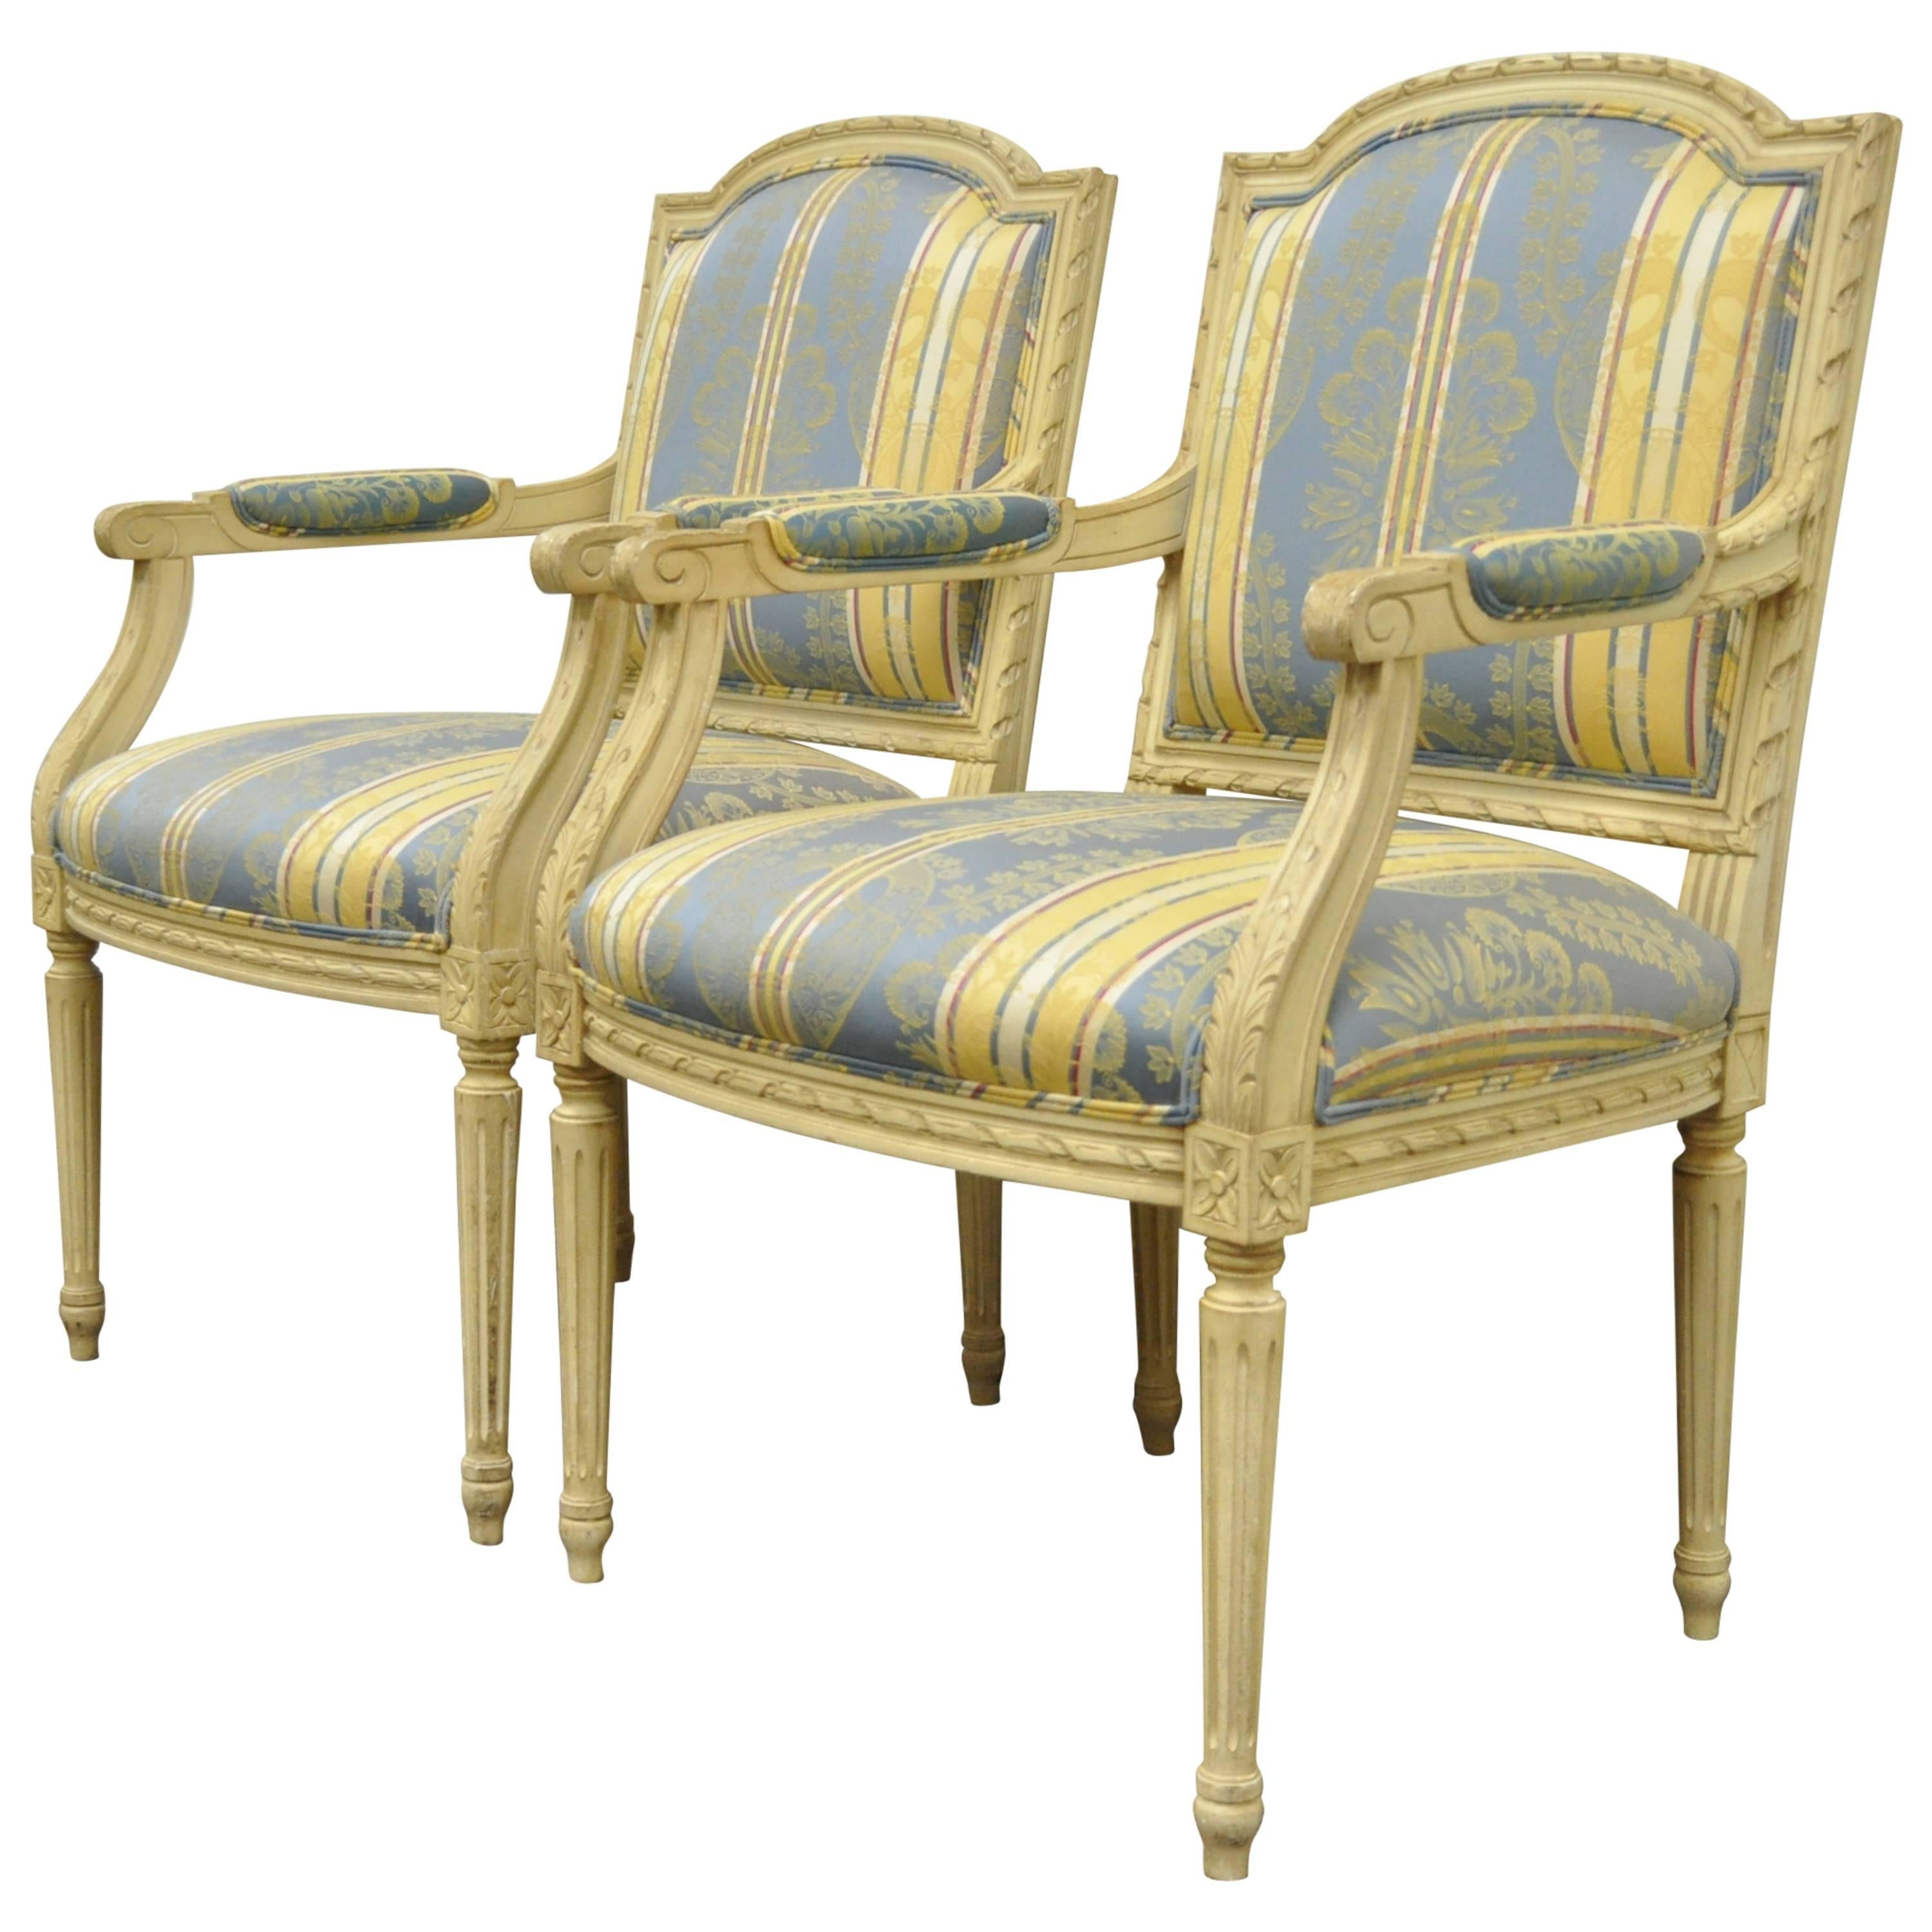 Pair of French Louis XVI Style Carved Cream Painted Fauteuil Dining Arm Chairs A